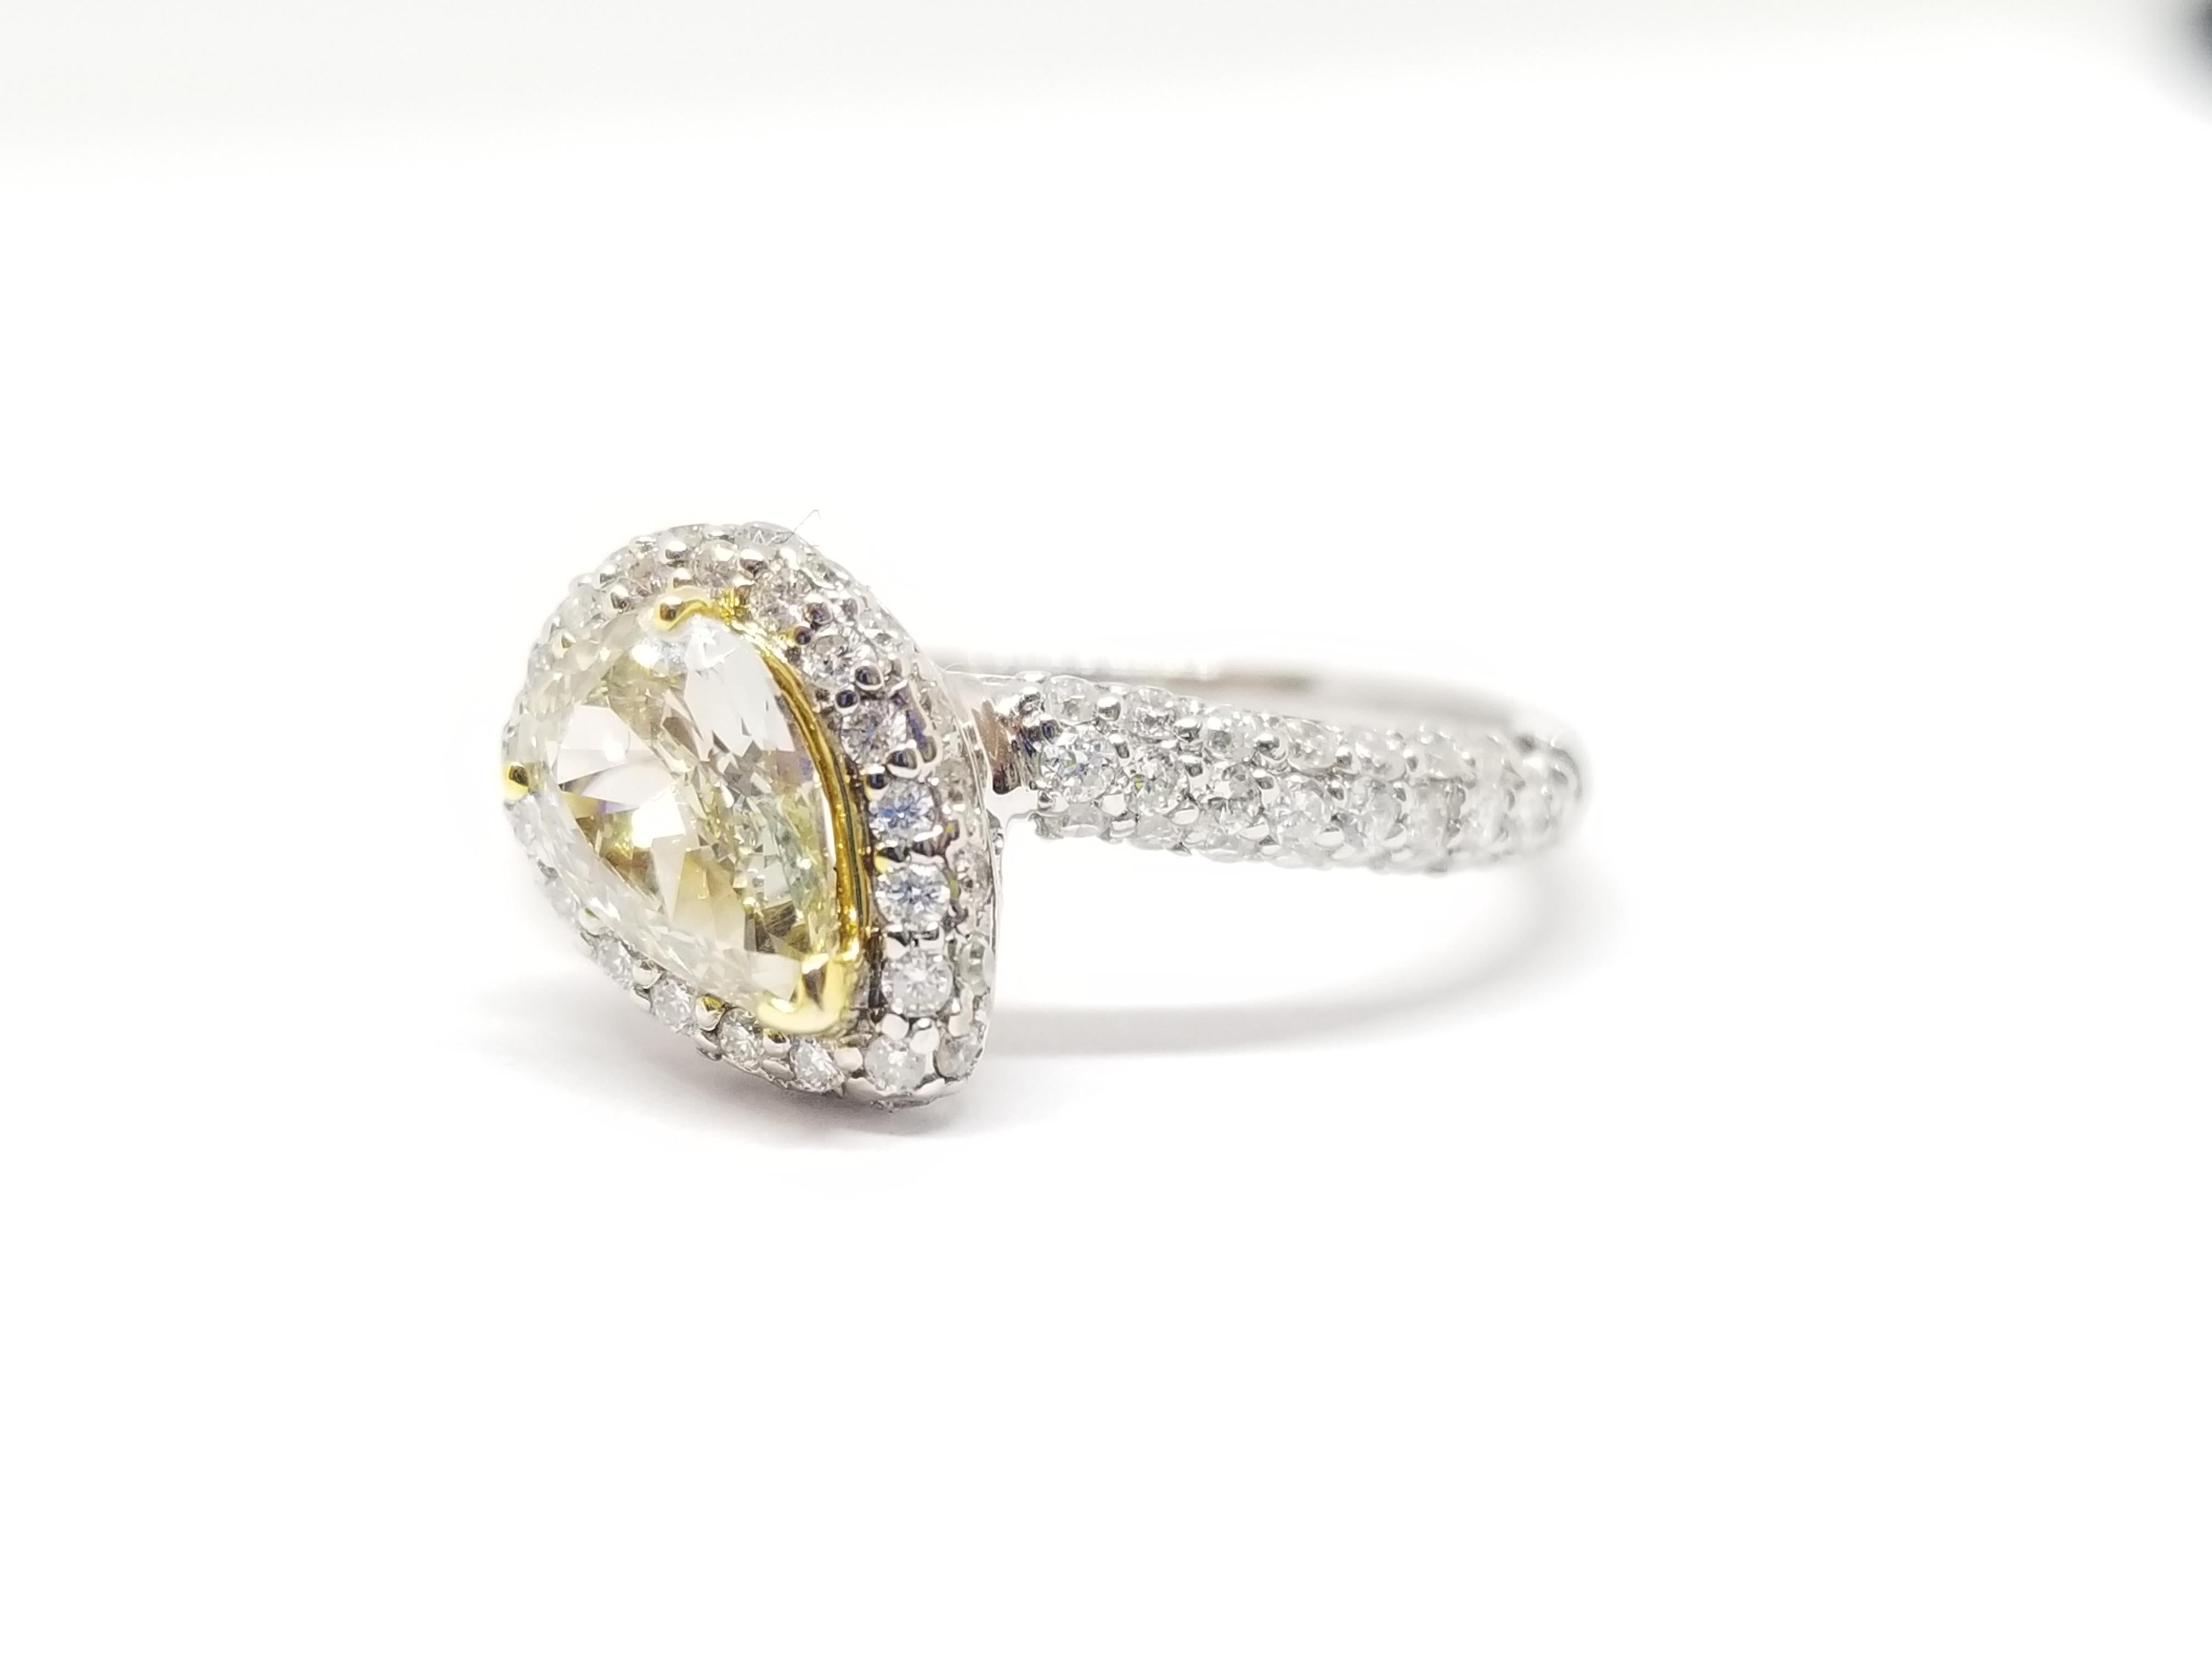 Fancy light brownish greenish yellow Pear Shape natural diamond weighing 0.76 carats GIA. surrounded by paved white diamonds in the halo setting. Its transparency and luster are excellent. set on 18K white gold, this pear ring is the ultimate gift